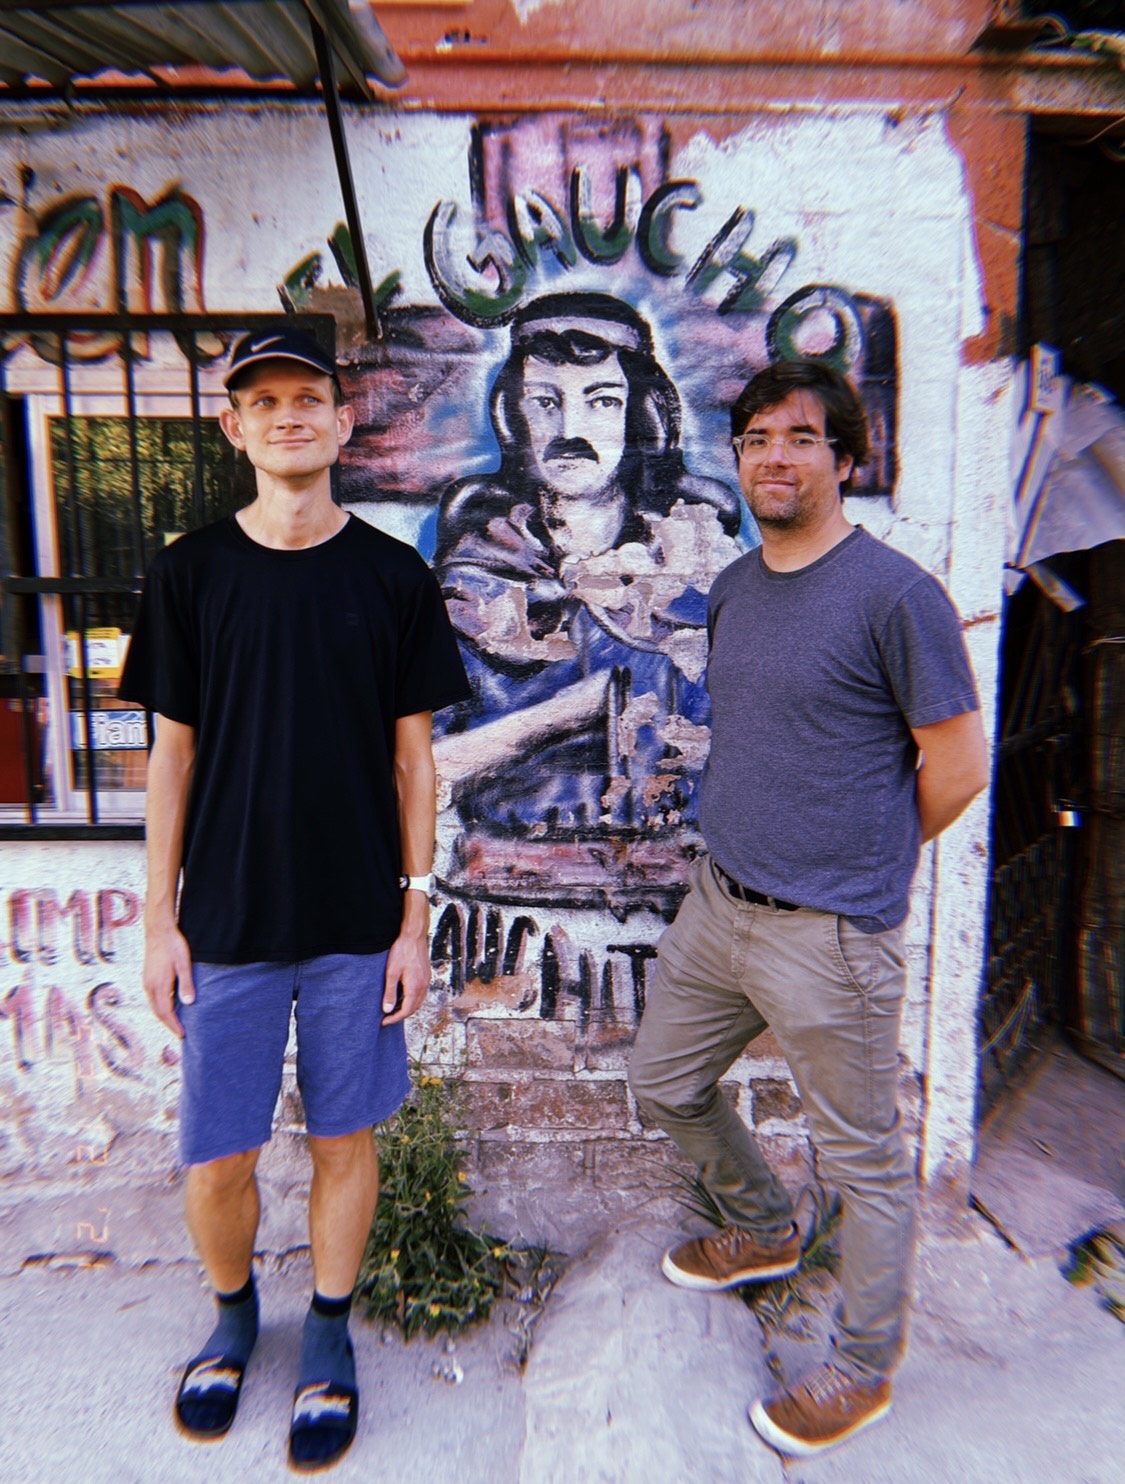 Santiago Siri a board member of Proof of Humanity, right, with Vitalik Buterin, the founder of Ethereum, in front of a mural in Argentina (Courtesy Ezequiel Churba)